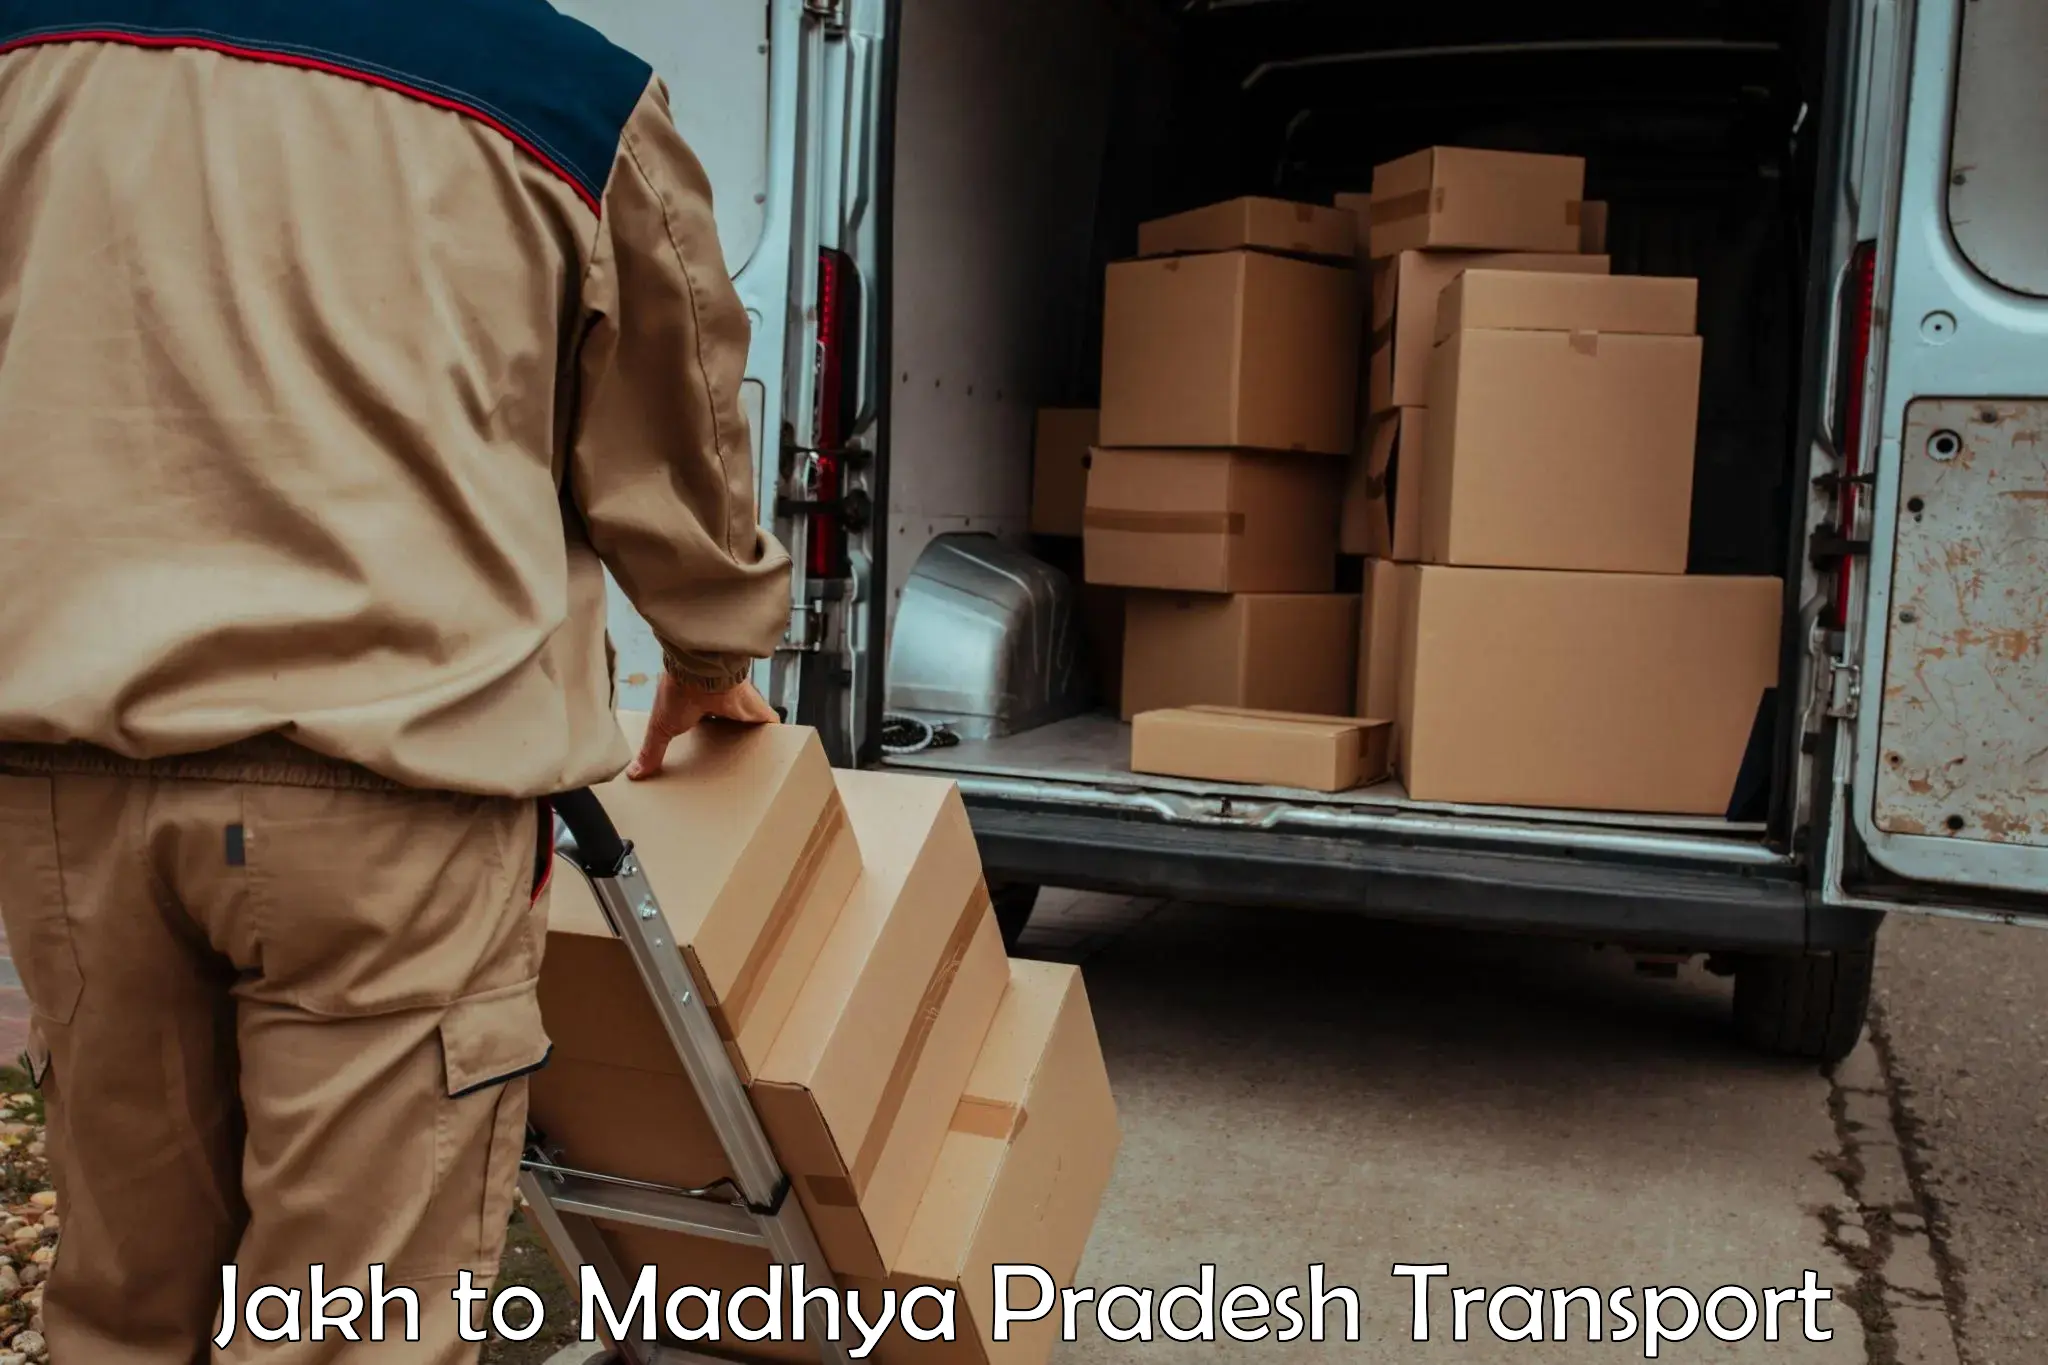 Truck transport companies in India Jakh to Chapda